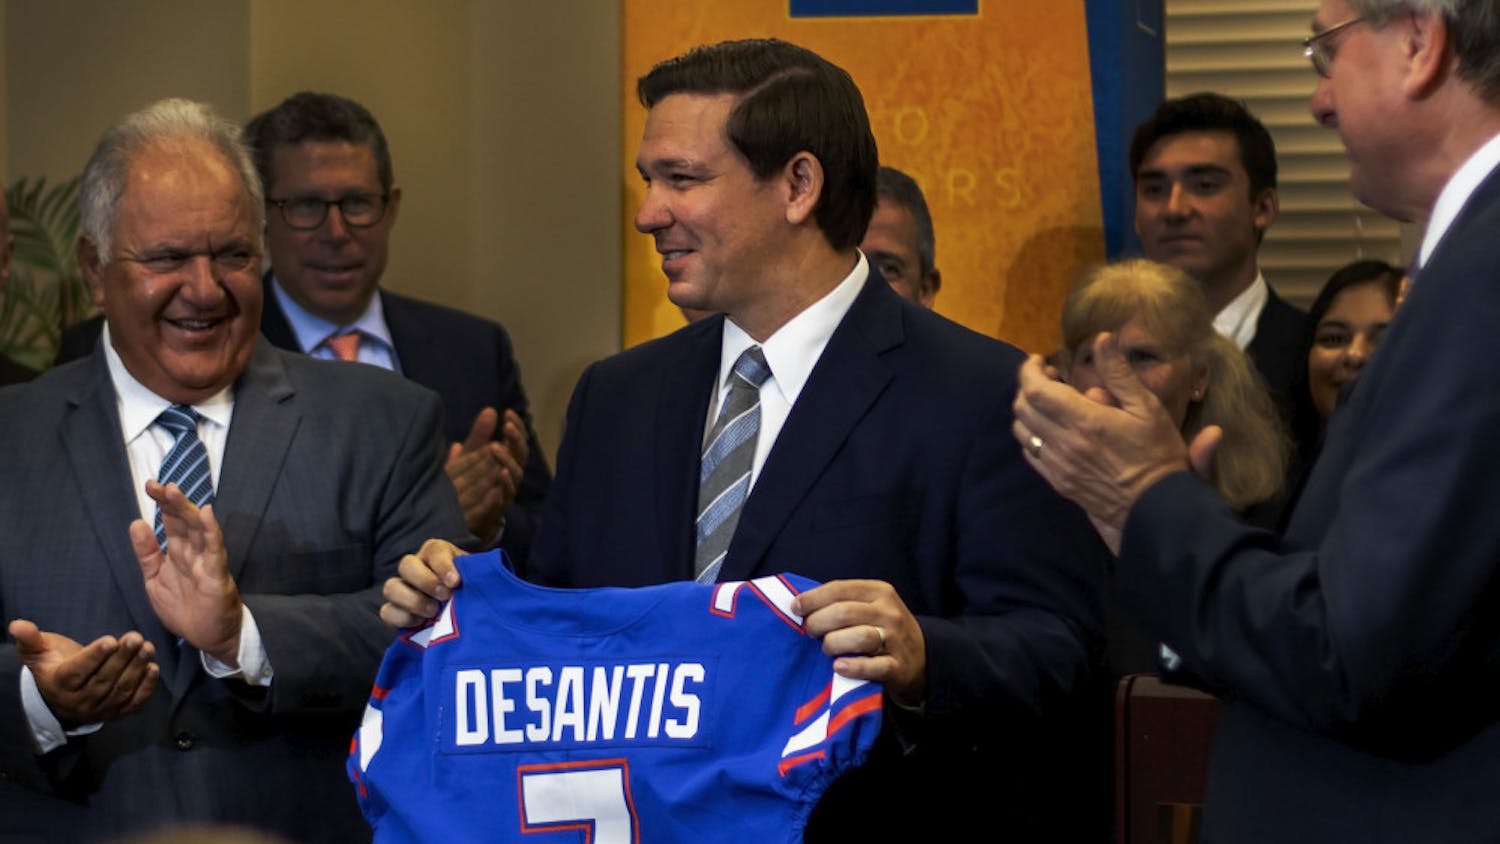 Florida Gov. Ron DeSantis has said he supports legislature similar to the name, image and likeness bill. DeSantis also played college baseball at Yale.